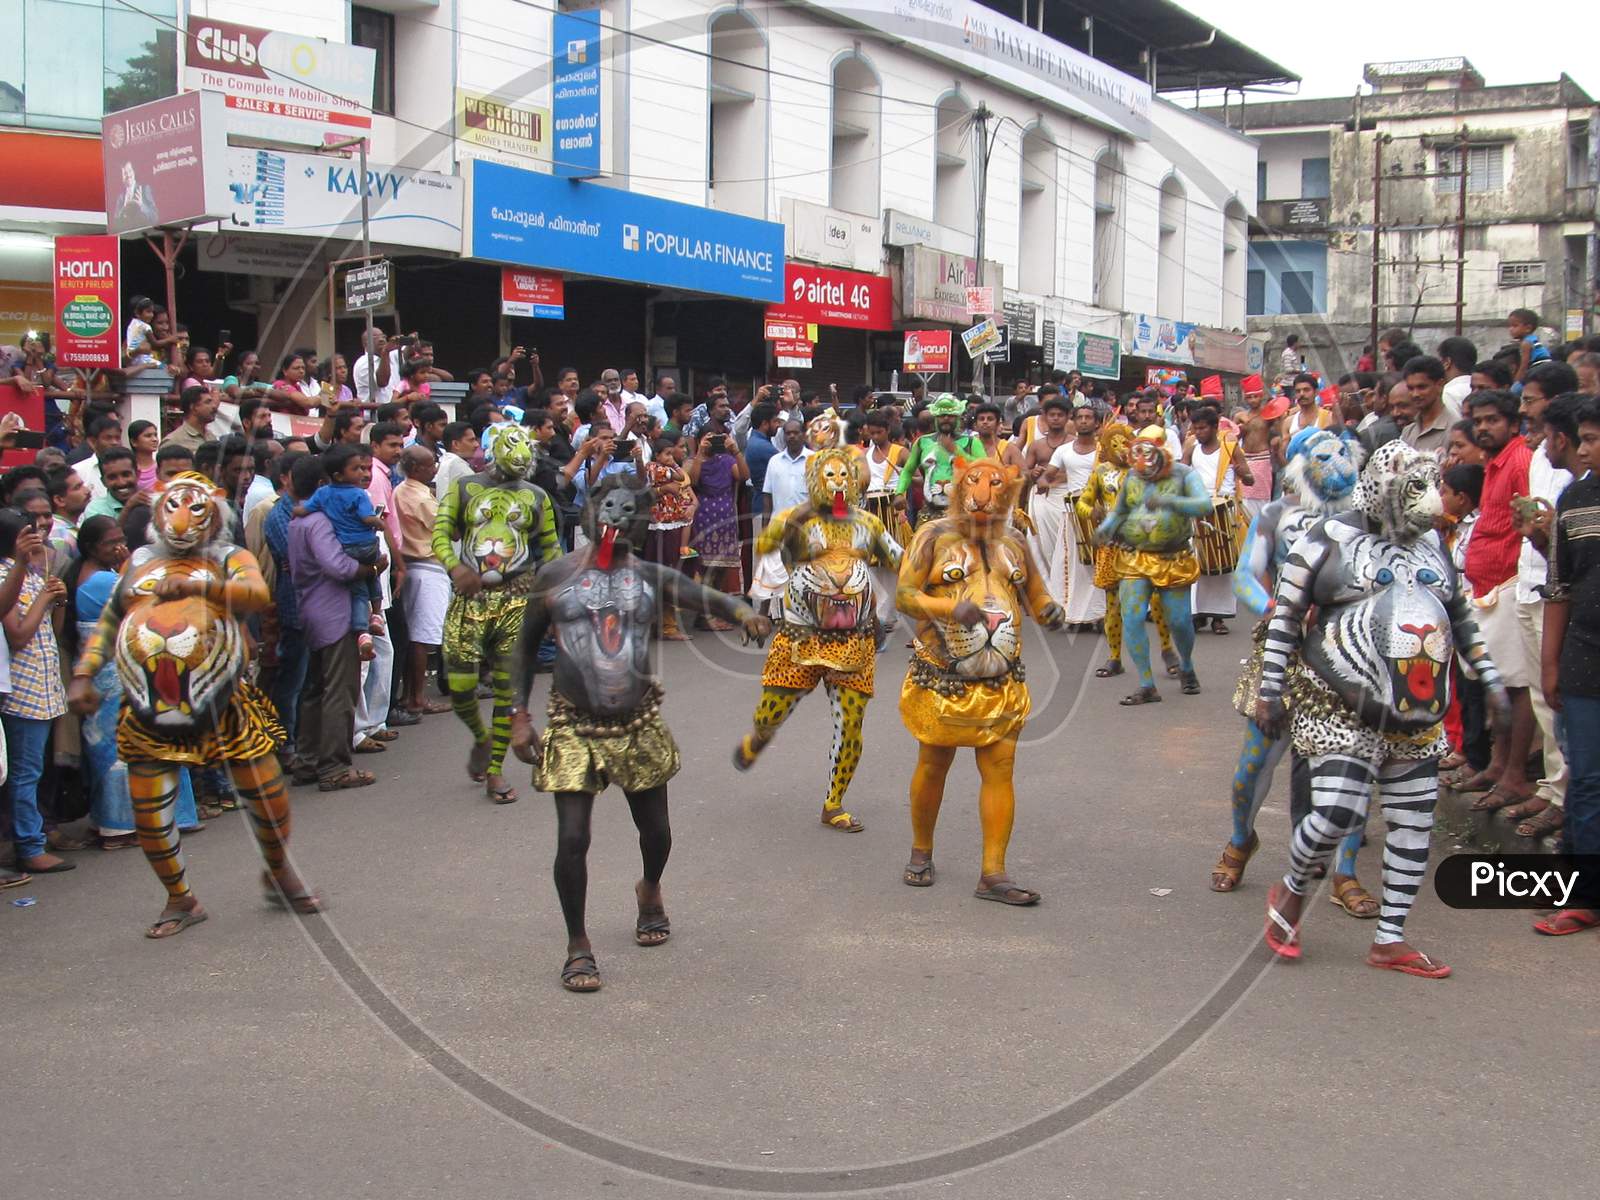 Pulikali / The Tiger dancers in a procession dancing